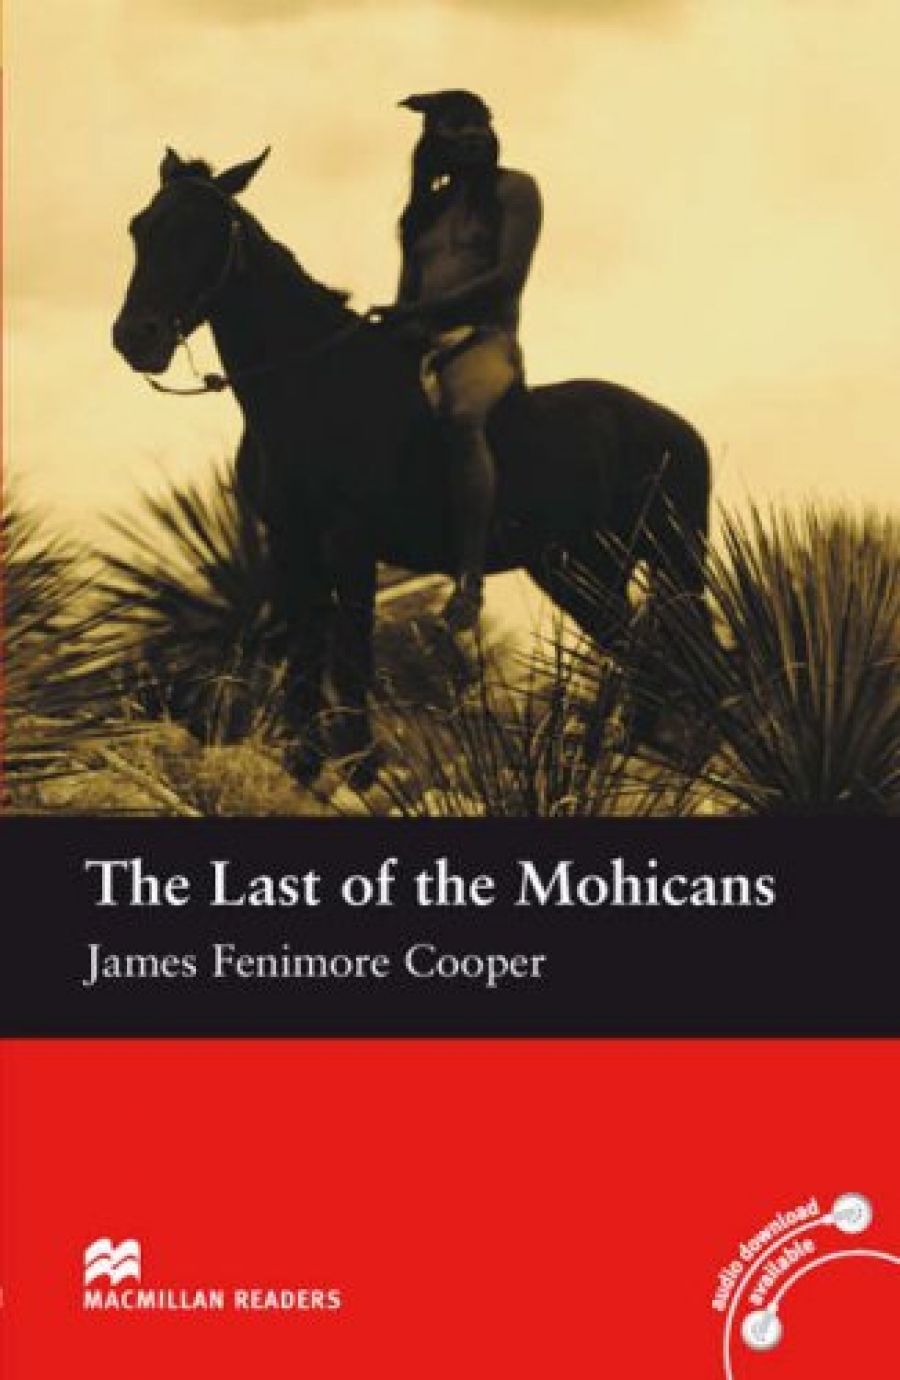 James Fenimore Cooper, retold by John Escott The Last of the Mohicans 